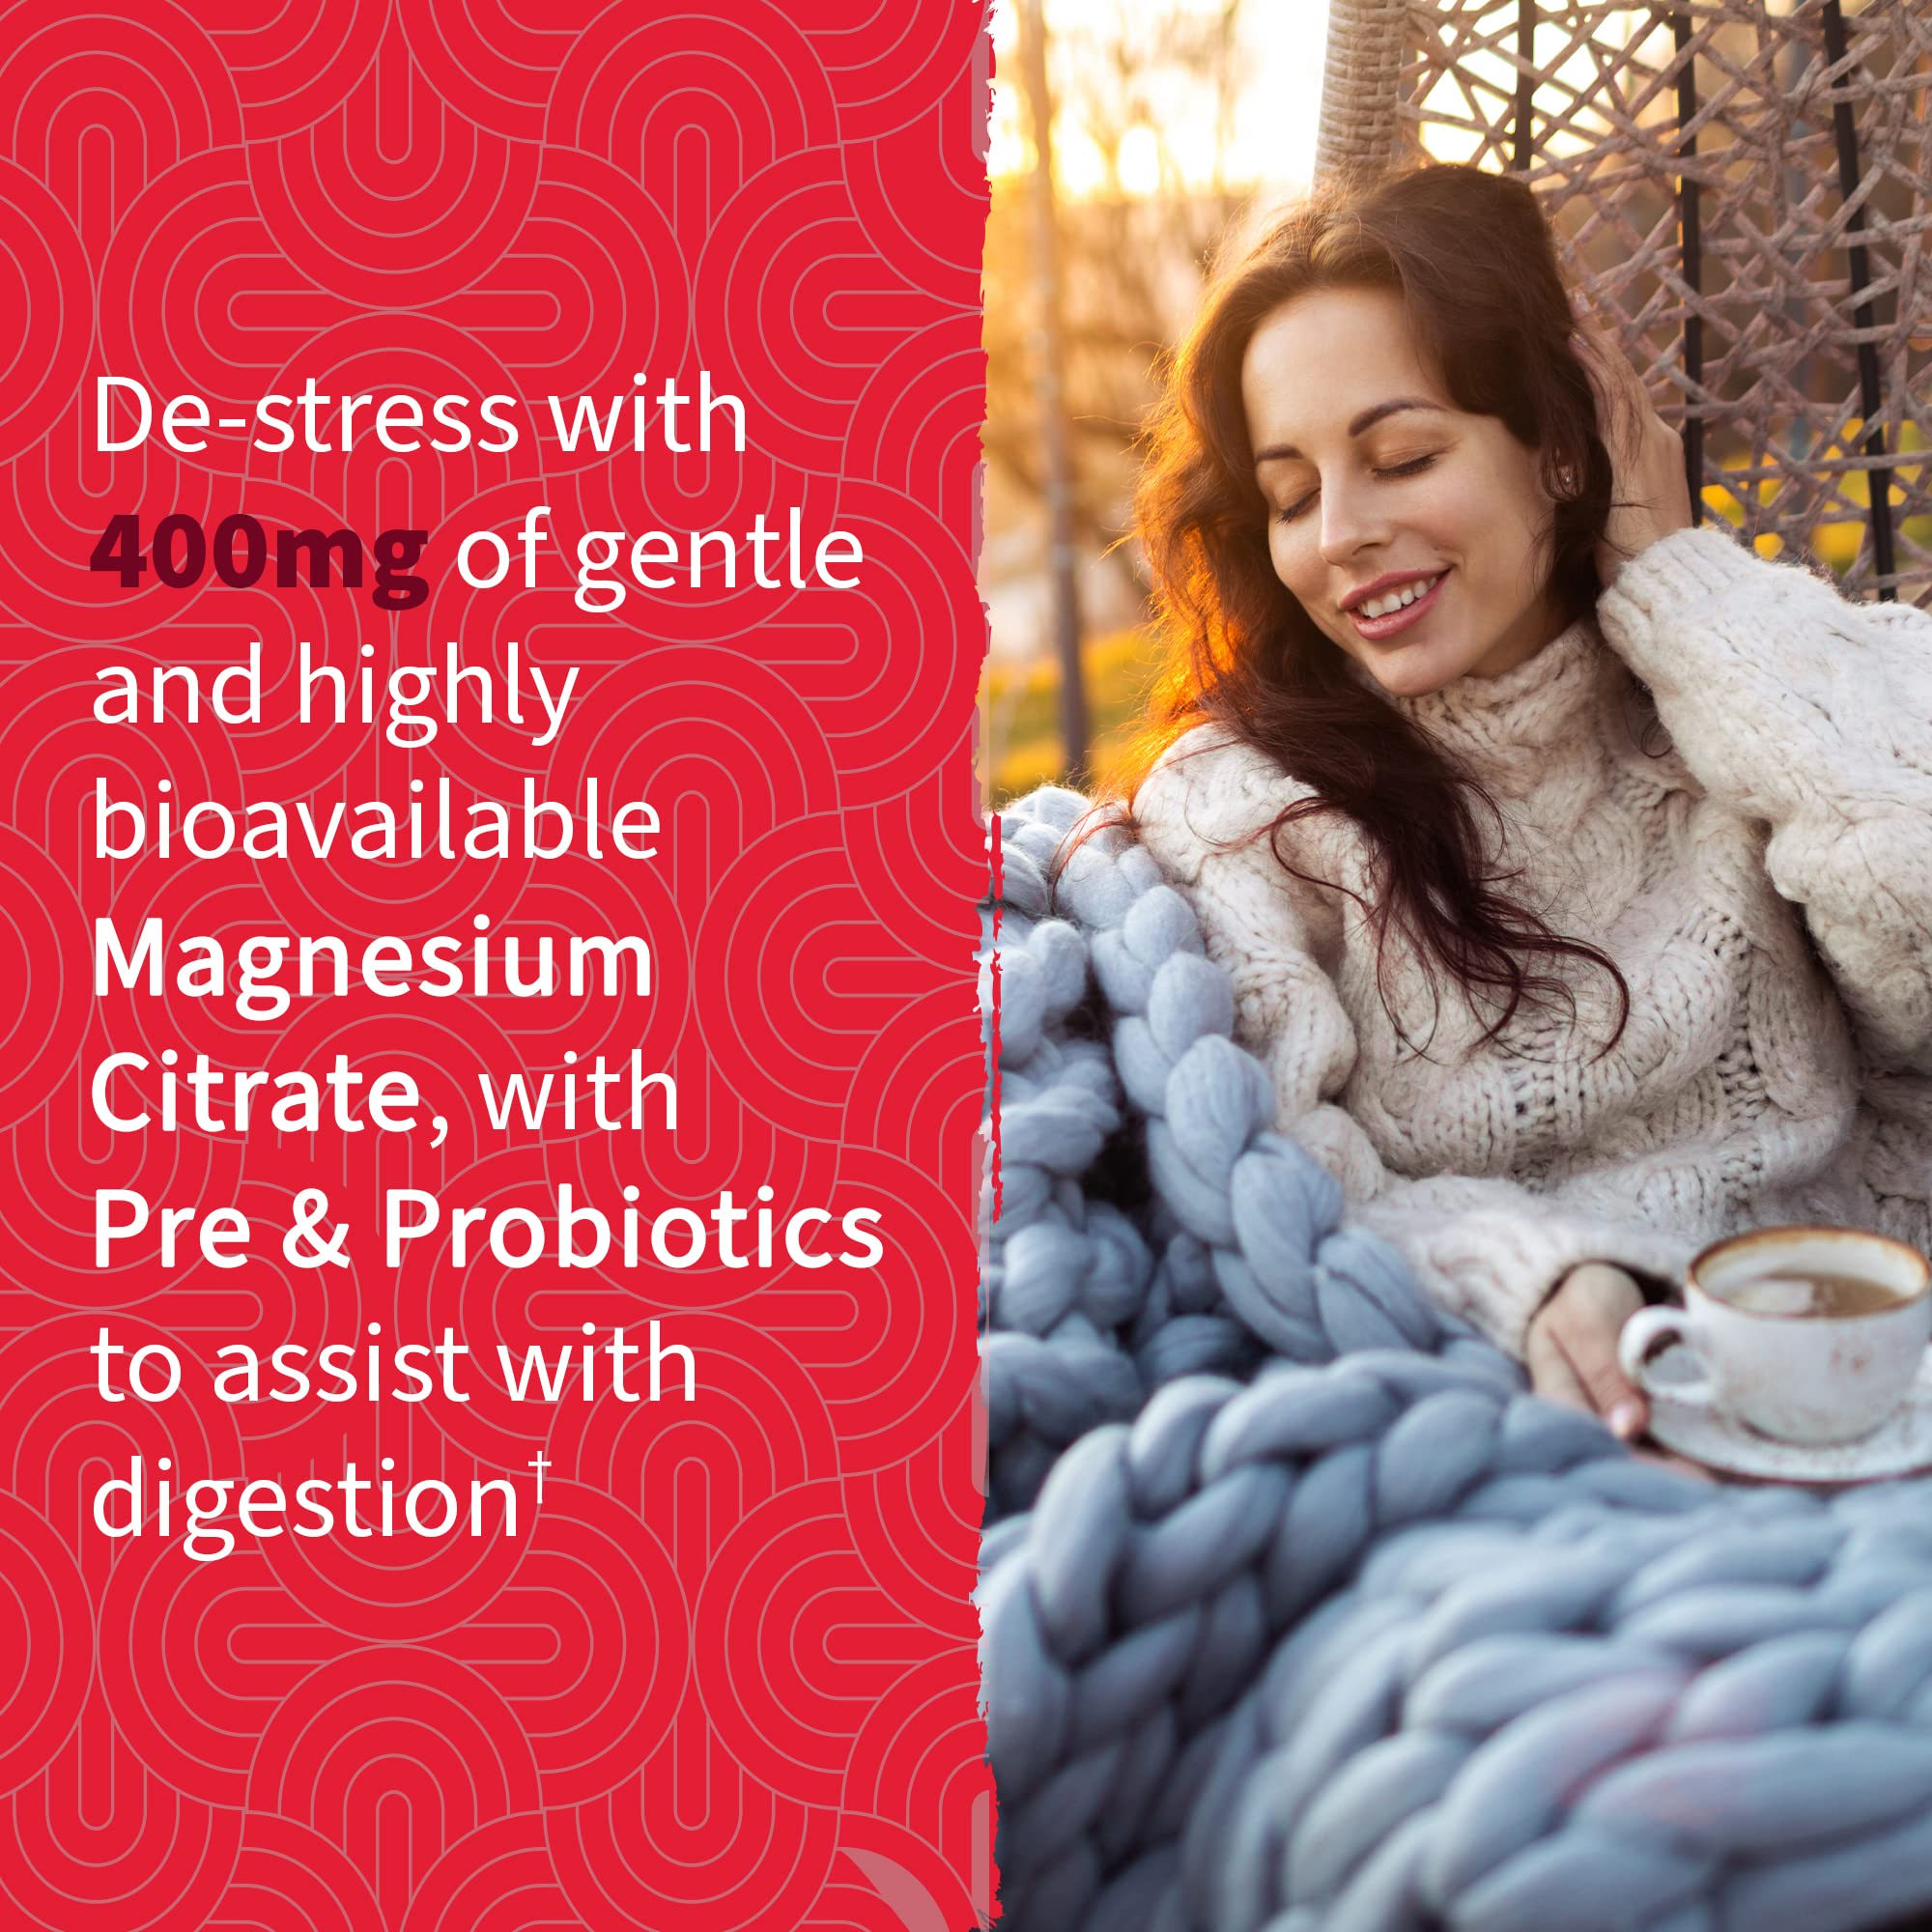 Garden of Life - Dr Formulated Magnesium Citrate Supplement with Prebiotics & Probiotics for Stress, Sleep & Recovery - Vegan, Gluten Free, Kosher, Non-GMO, No Added Sugars – 60 Raspberry Gummies